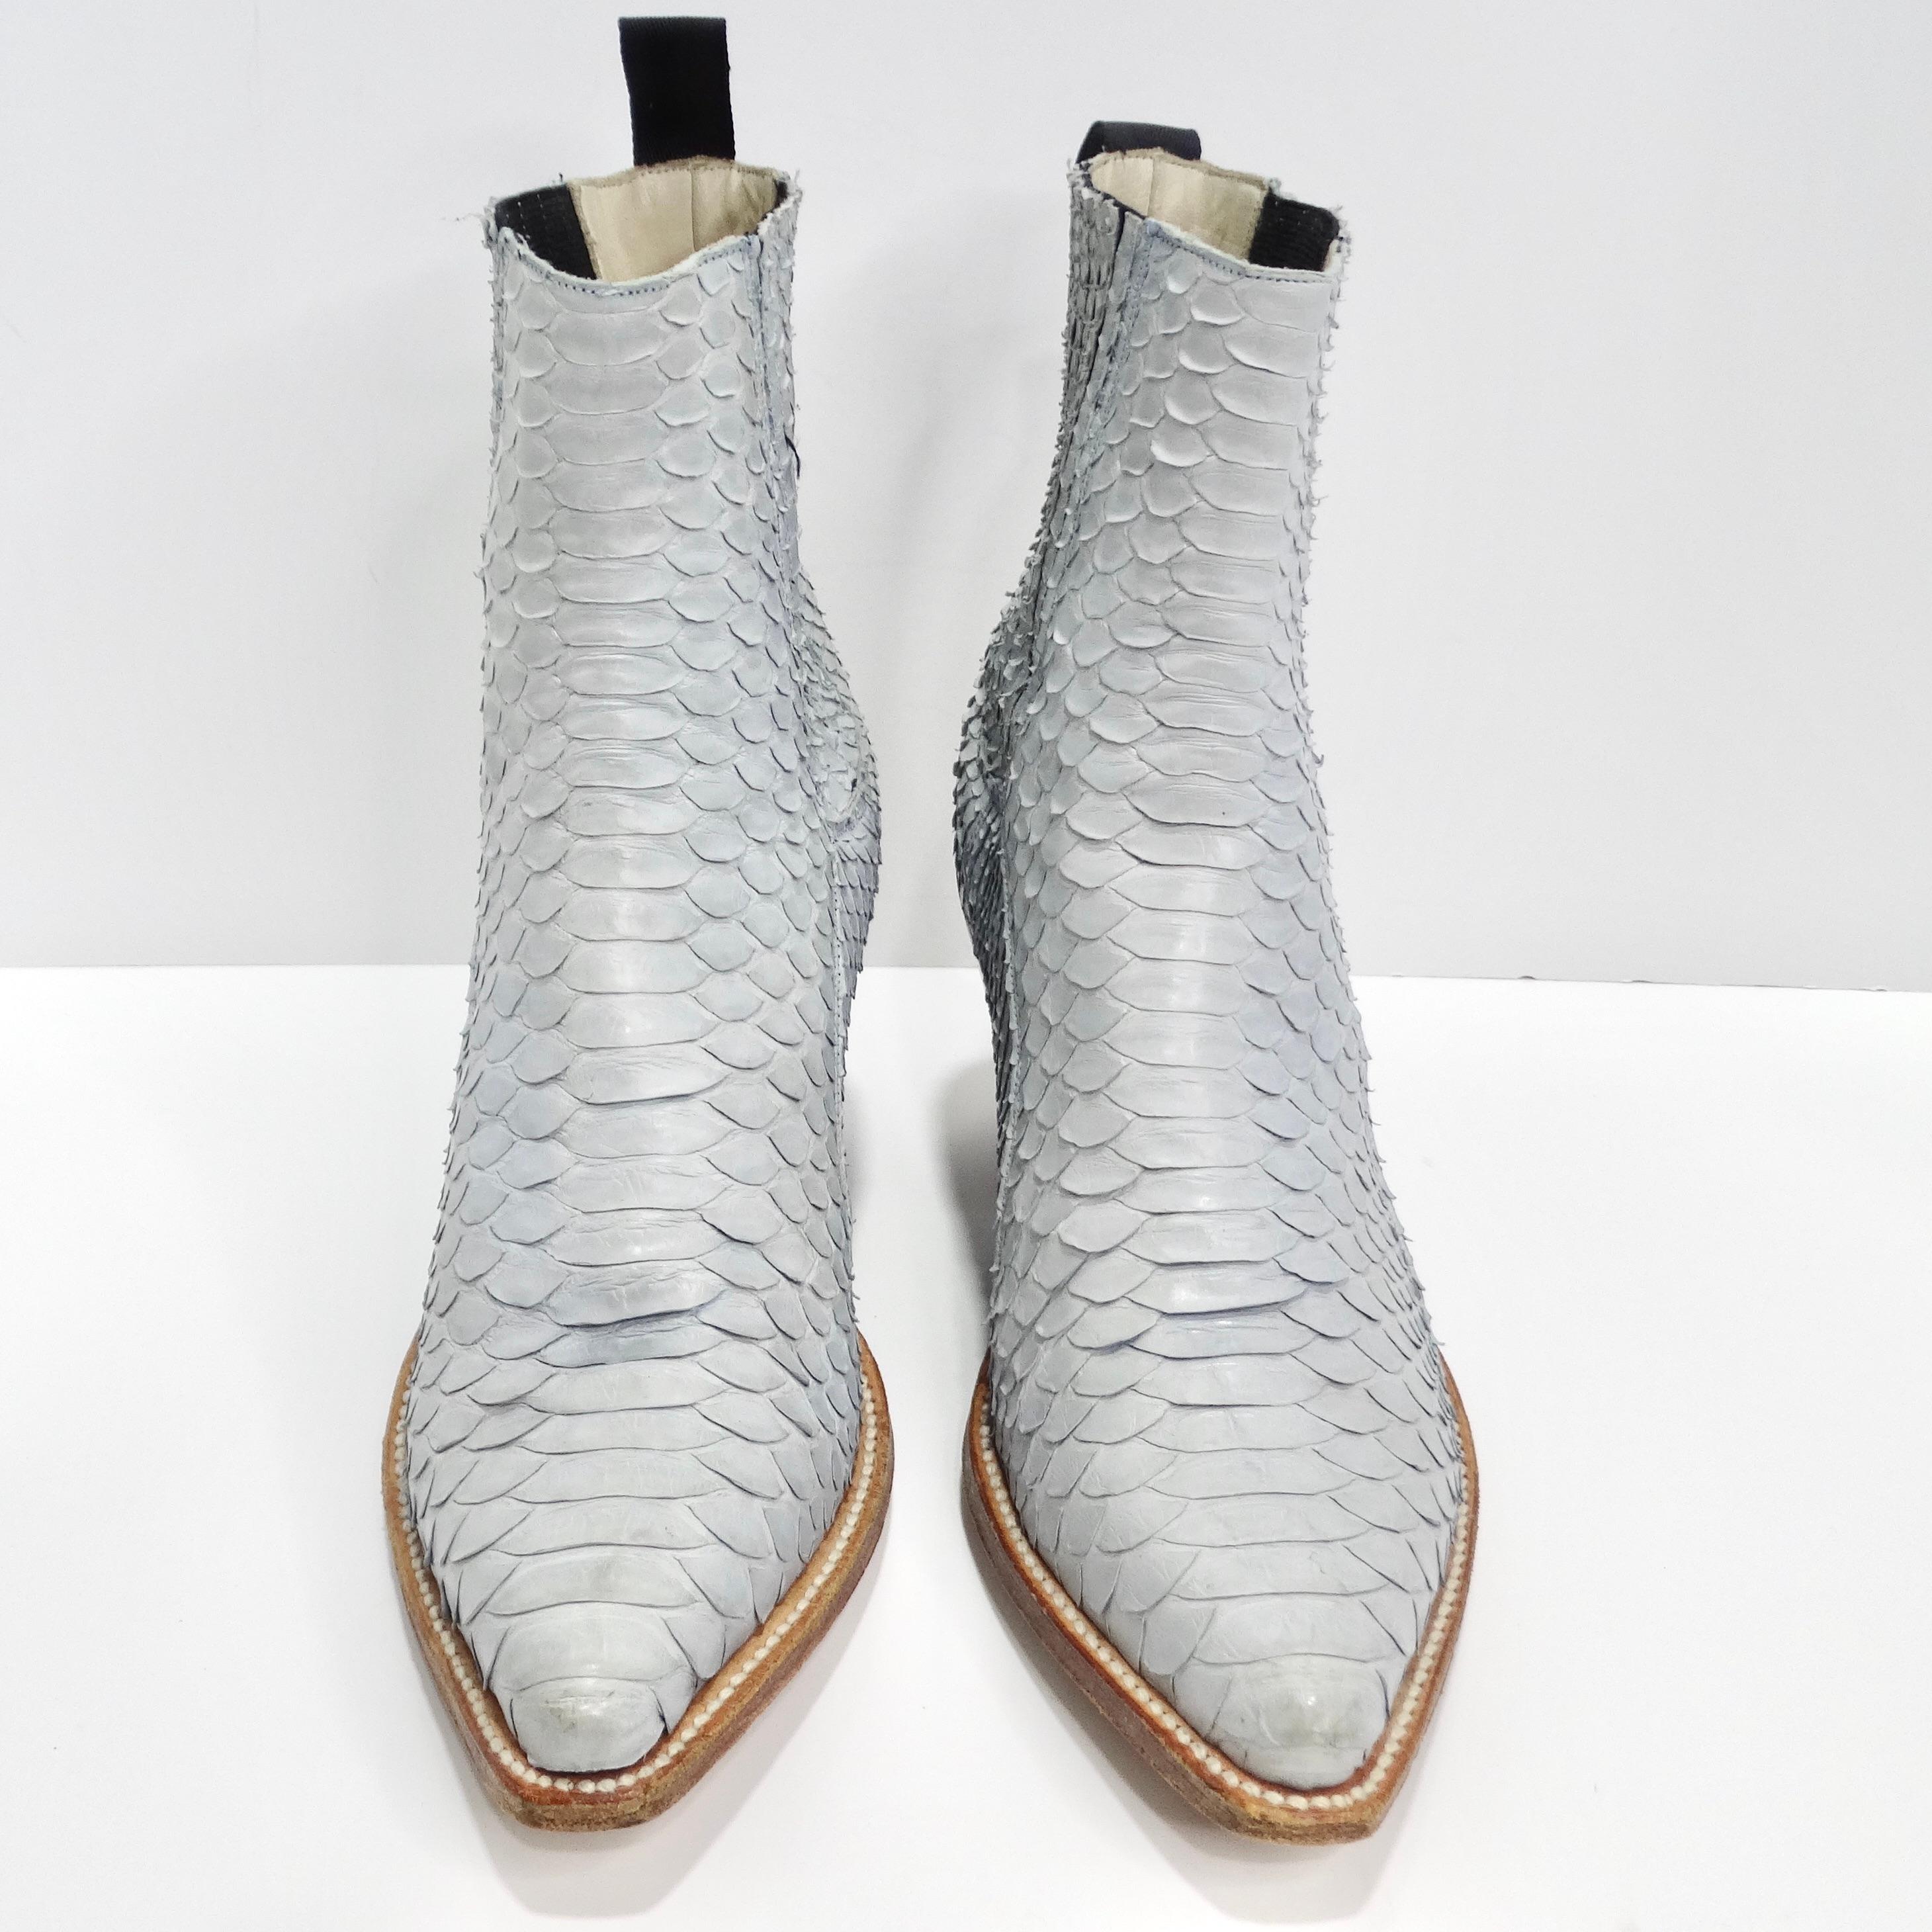 Step into the height of luxury with the Tony Mora Blue Python Ankle Boots. Crafted from genuine light blue python leather, these ankle boots exude opulence and sophistication. The unique texture and color of the python leather make these boots a